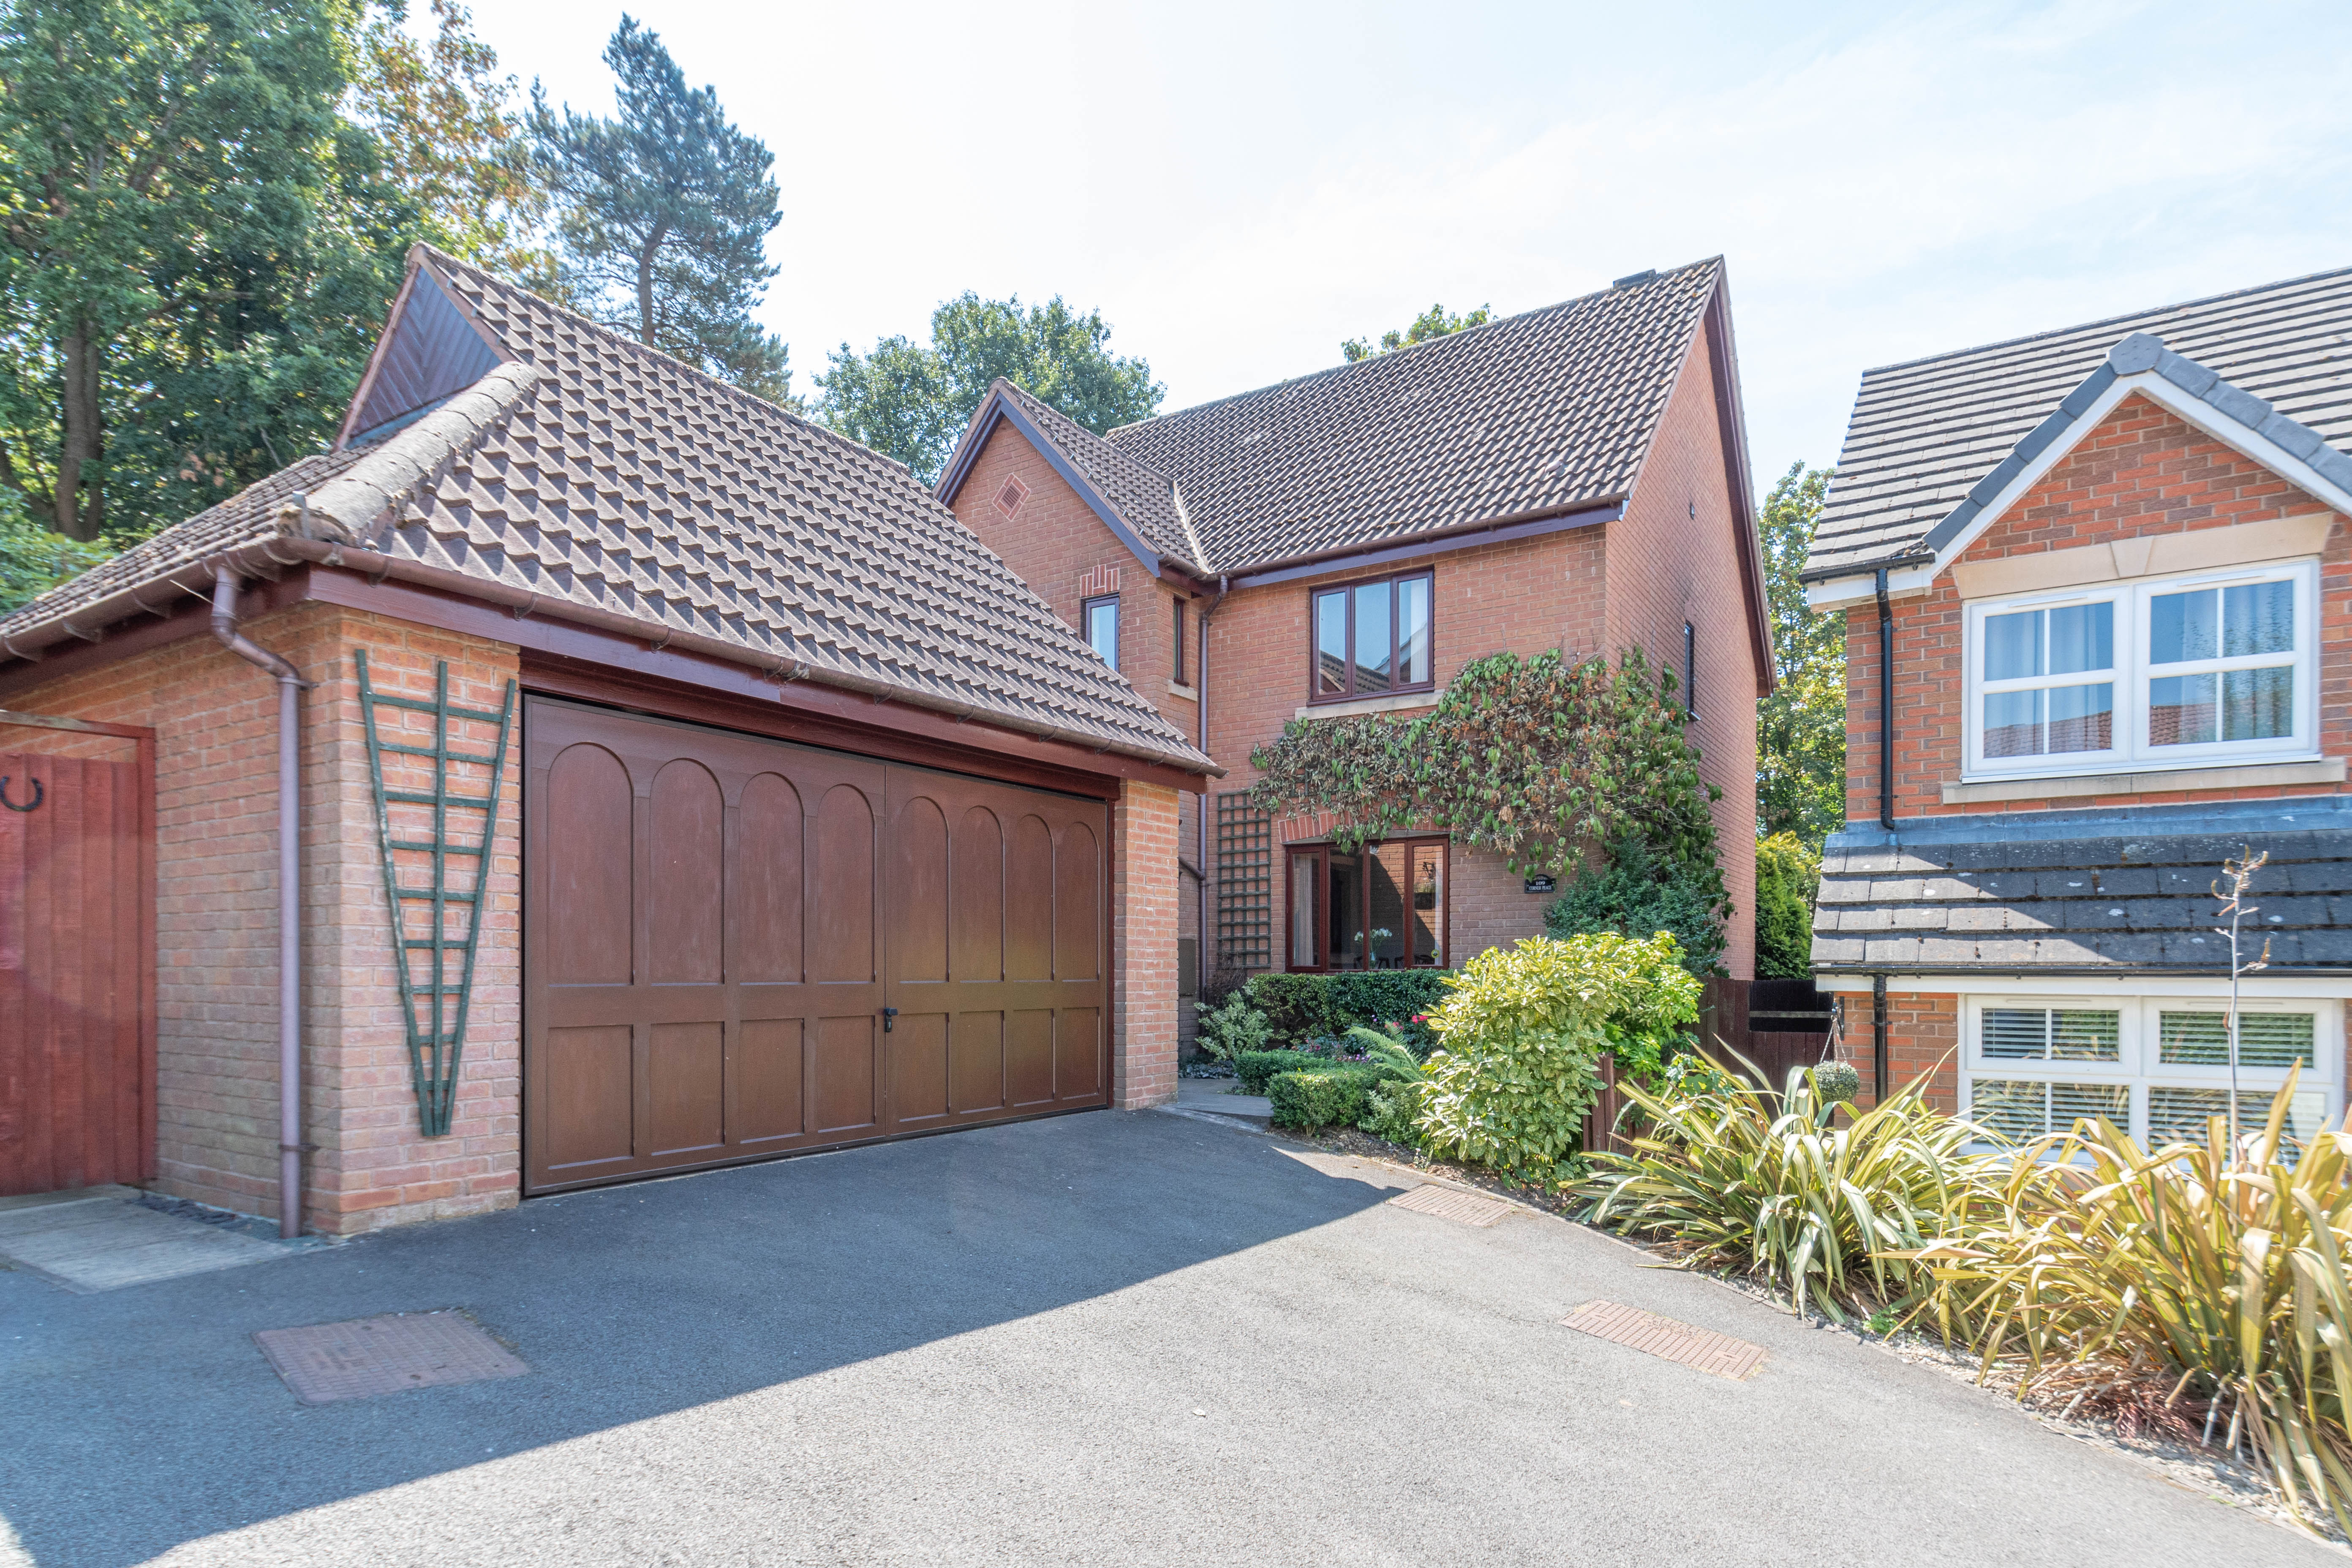 4 bed house for sale in Foxholes Lane, Callow Hill  - Property Image 25